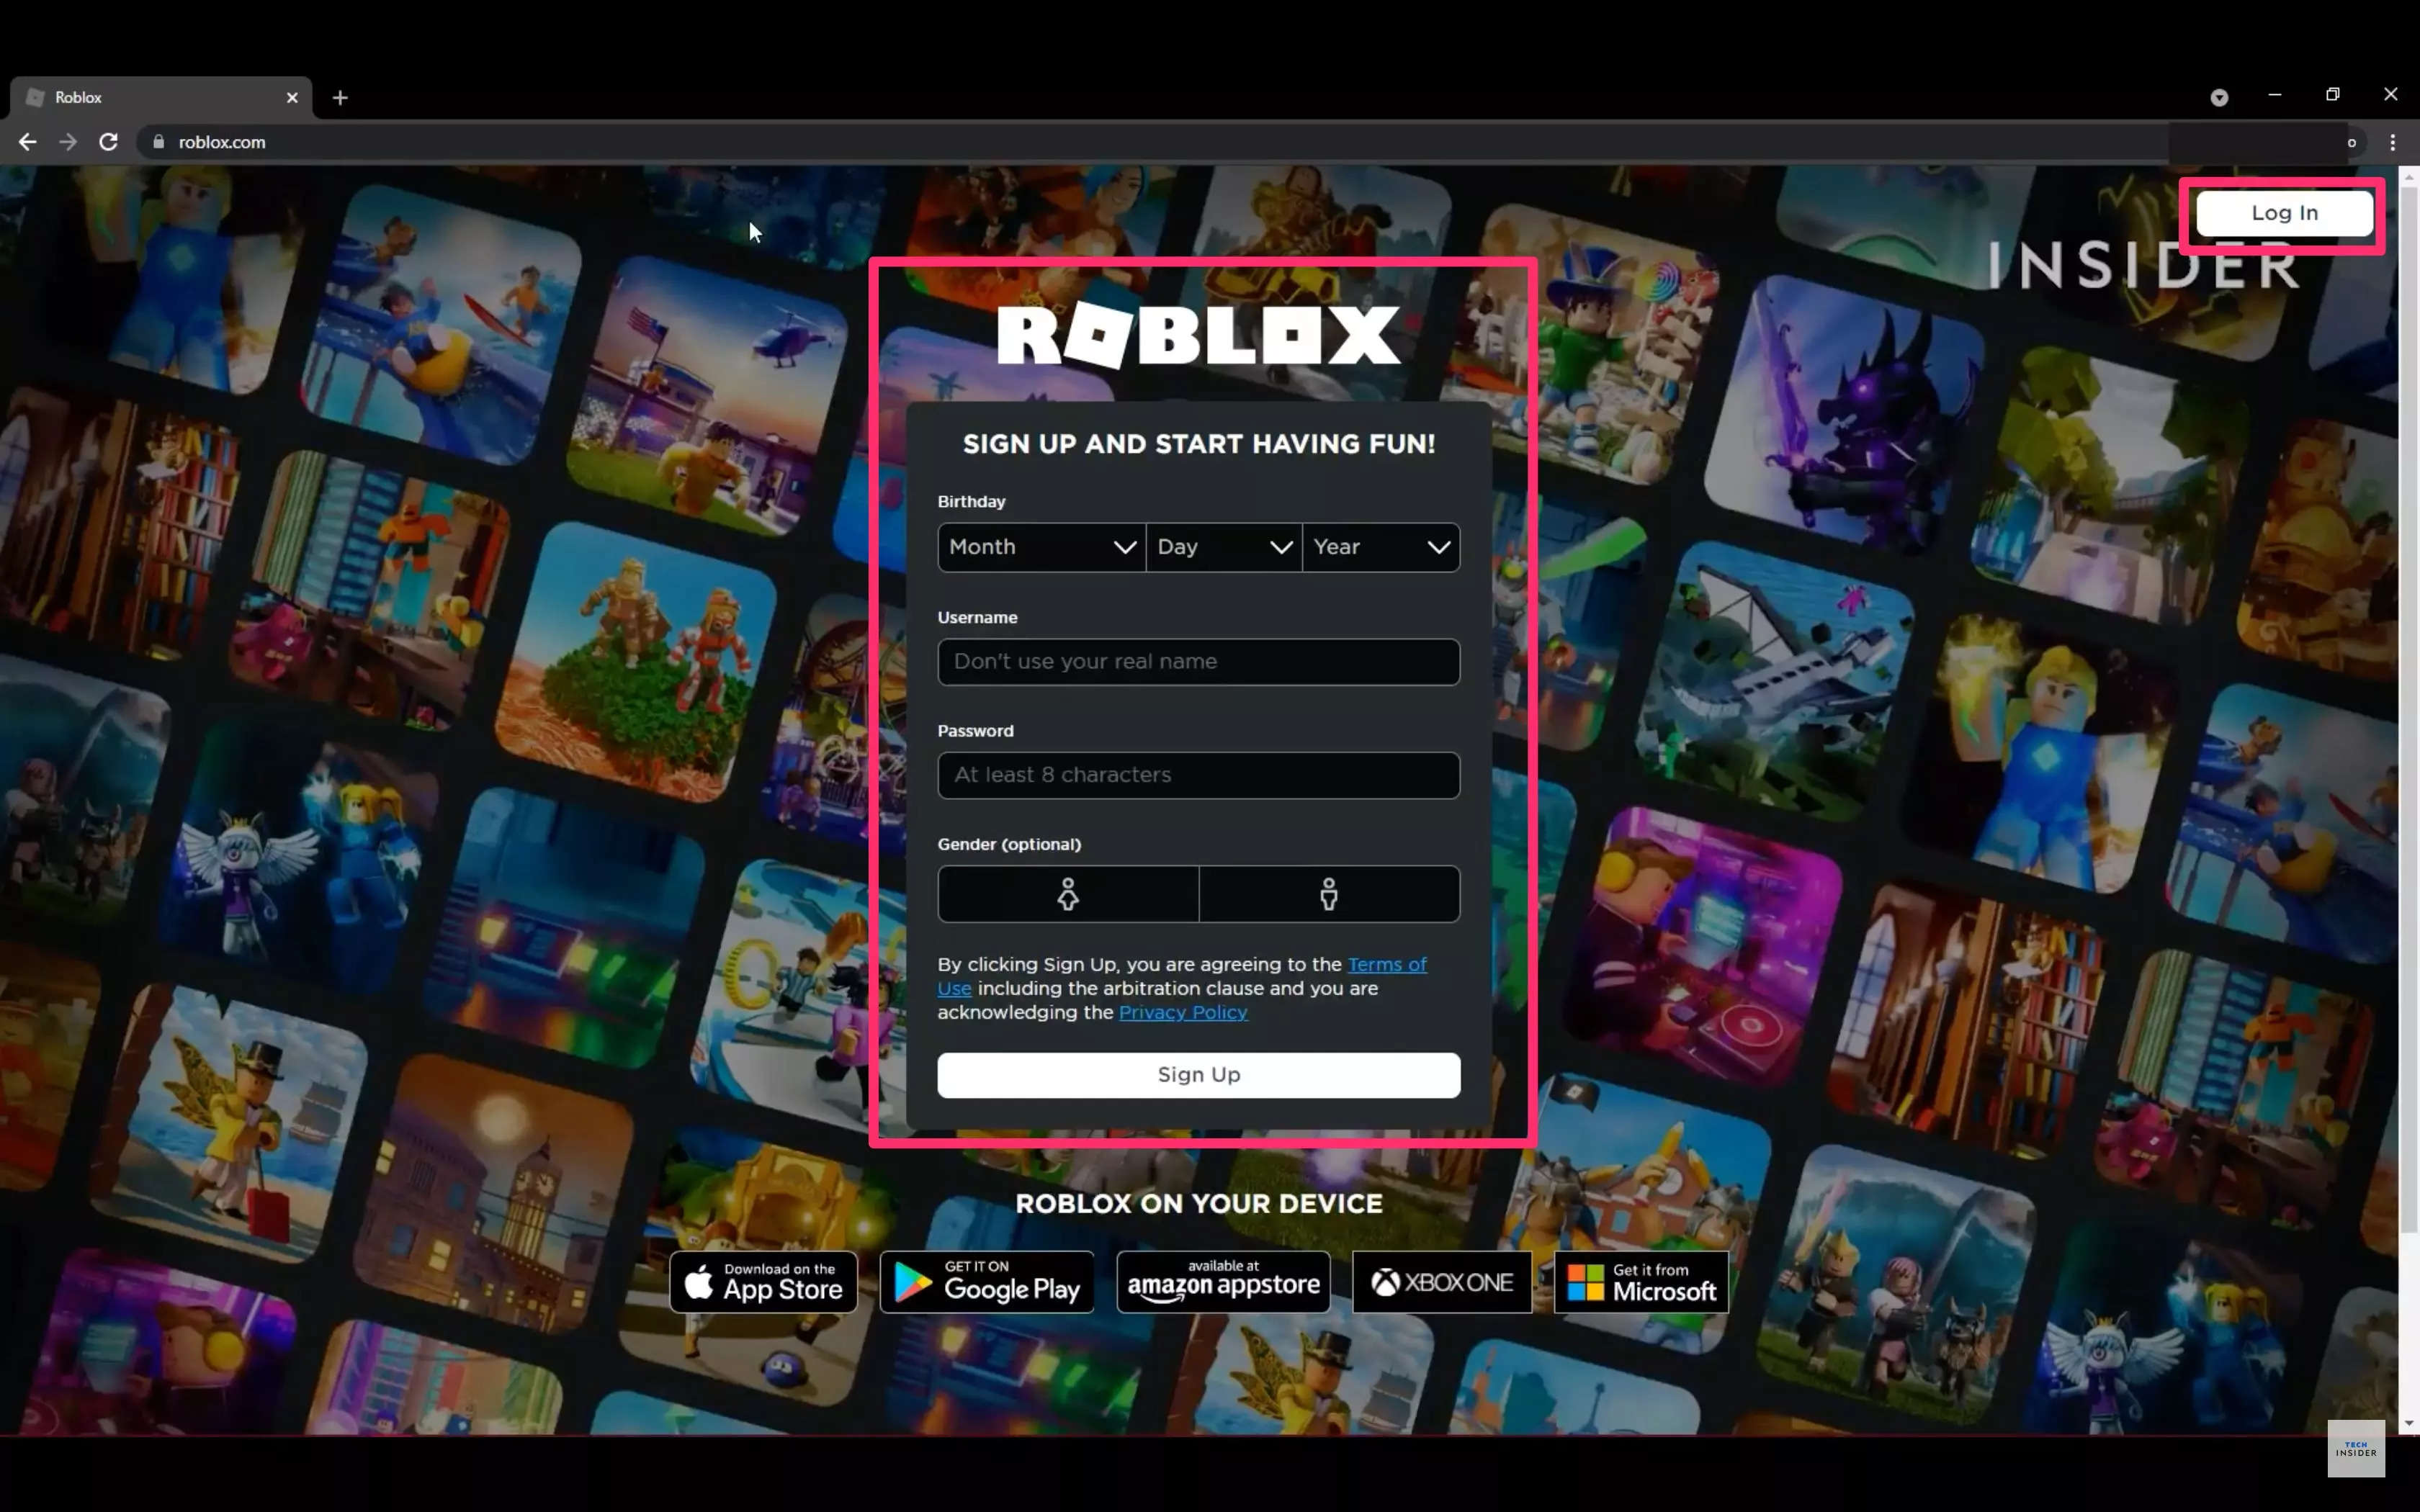 How to download Roblox on a Windows PC and join millions of users